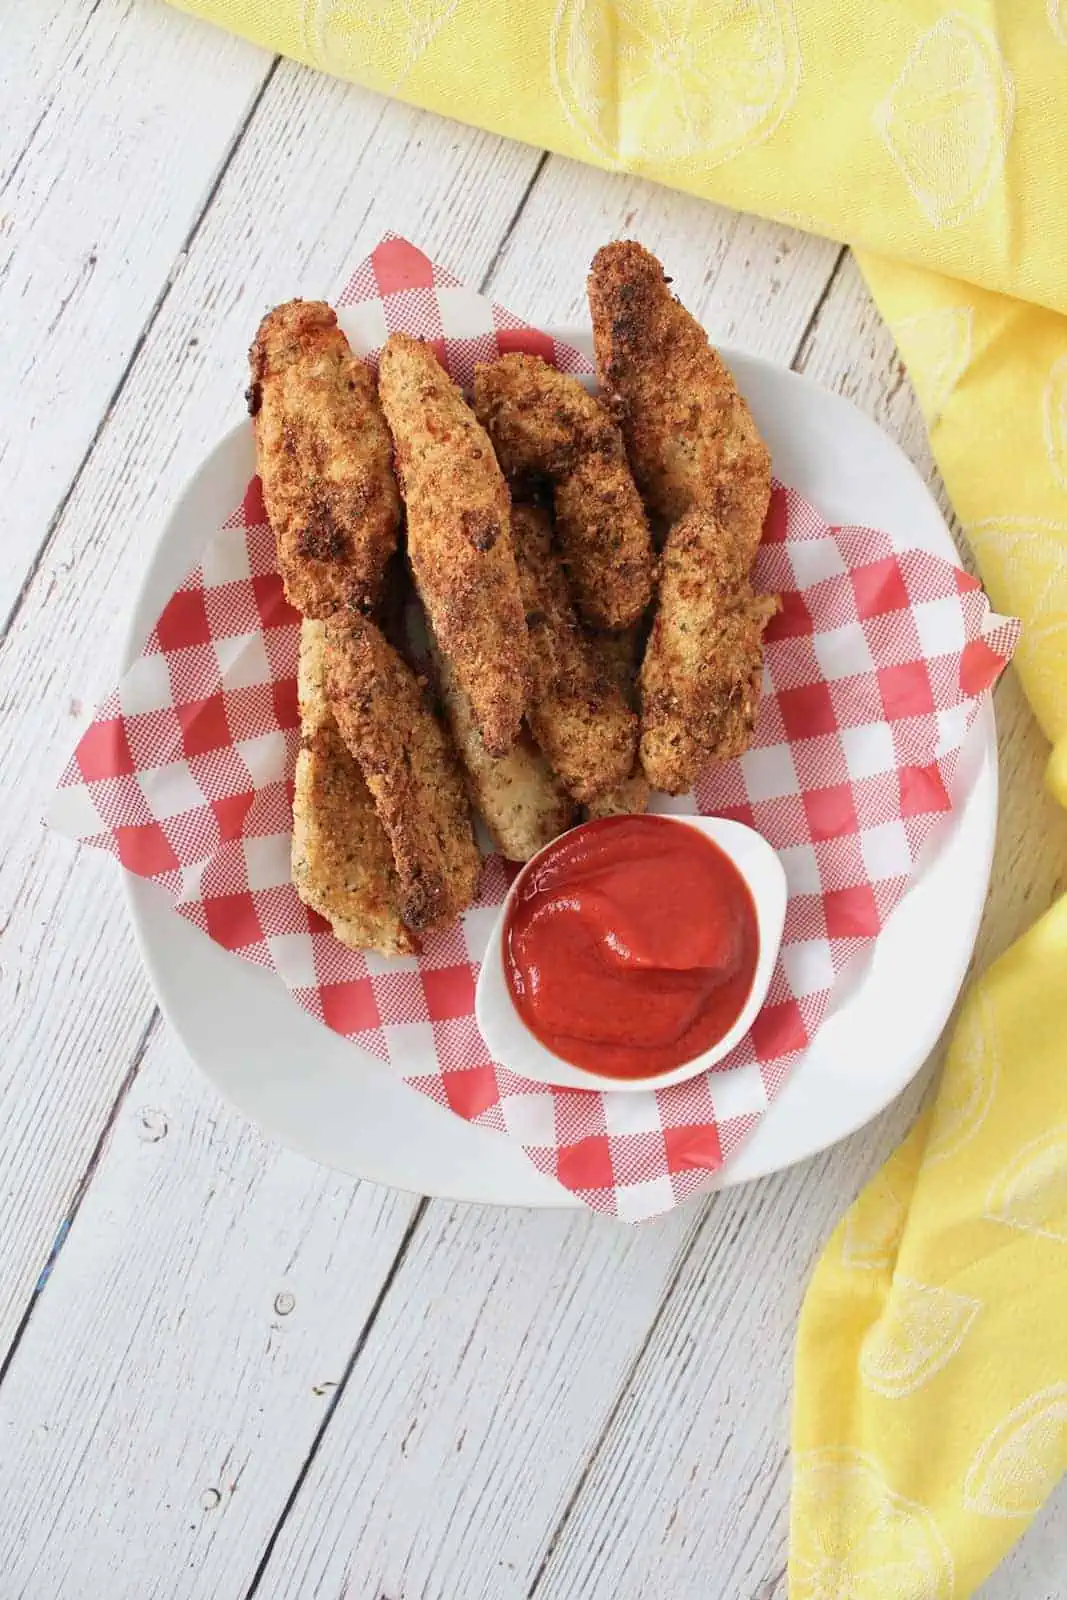 Overhead shot of finished chicken fingers in a white shallow bowl lined with red and white checkered picnic paper with a white dish of ketchup in the bowl on a white wooden surface with a yellow dish towel next to it